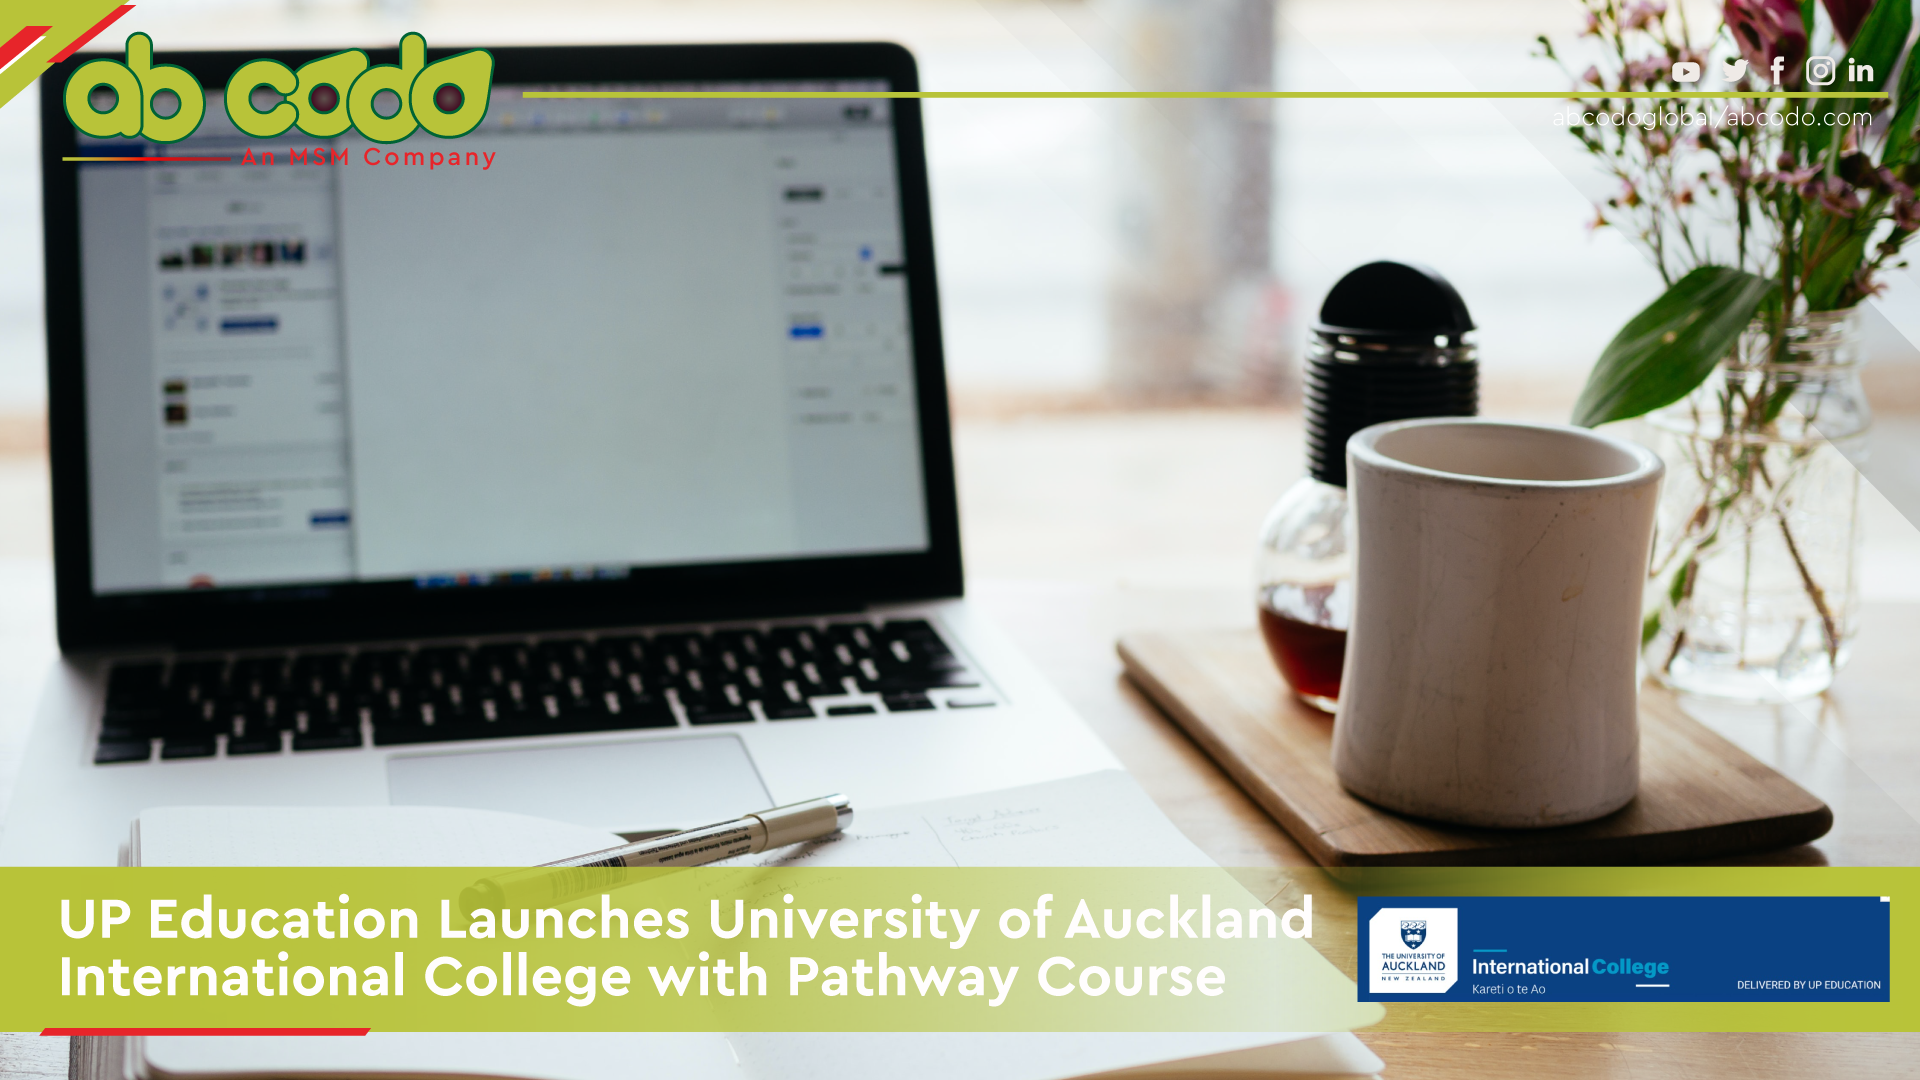 UP Education Launches University of Auckland International College with Pathway Course